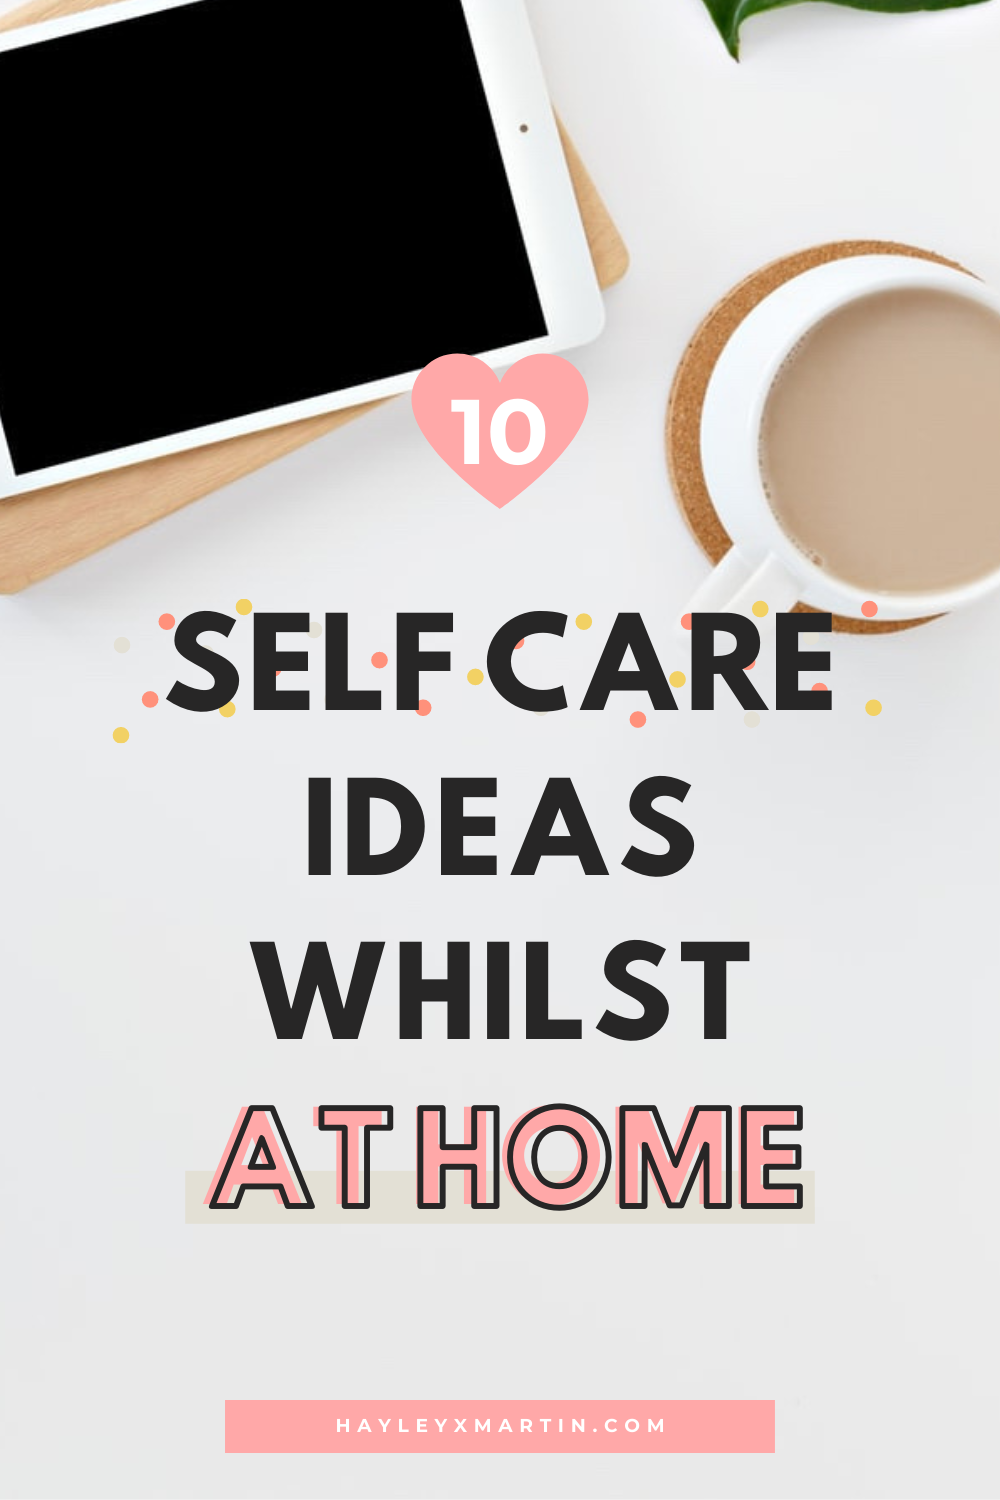 10 self care ideas whilst stuck at home | hayleyxmartin